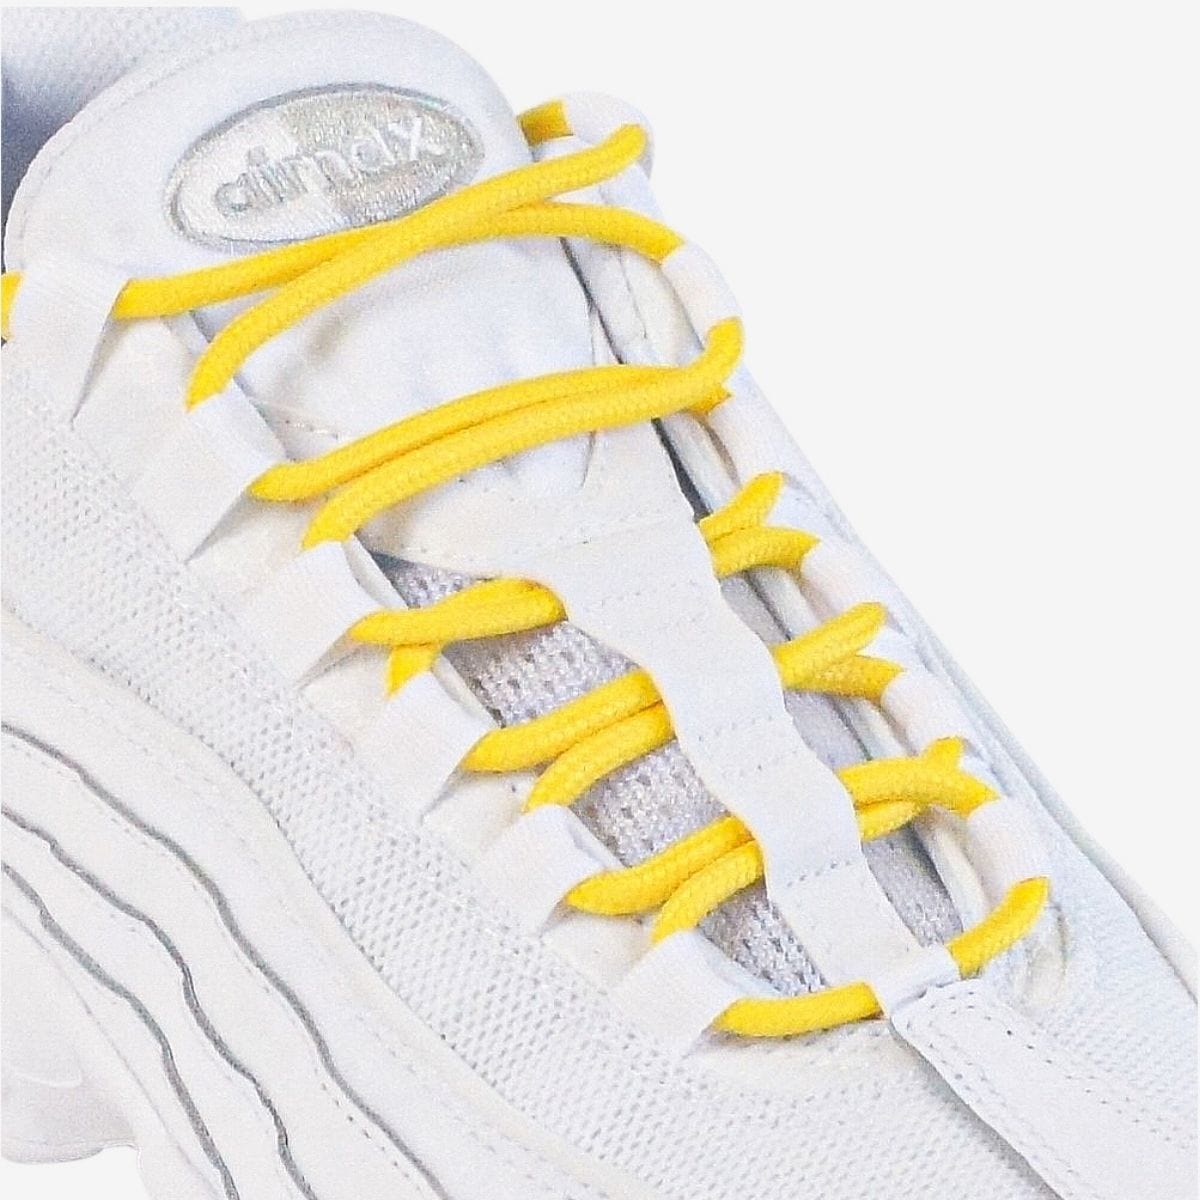 yellow-round-rope-shoelaces-for-sneakers-and-running-shoes